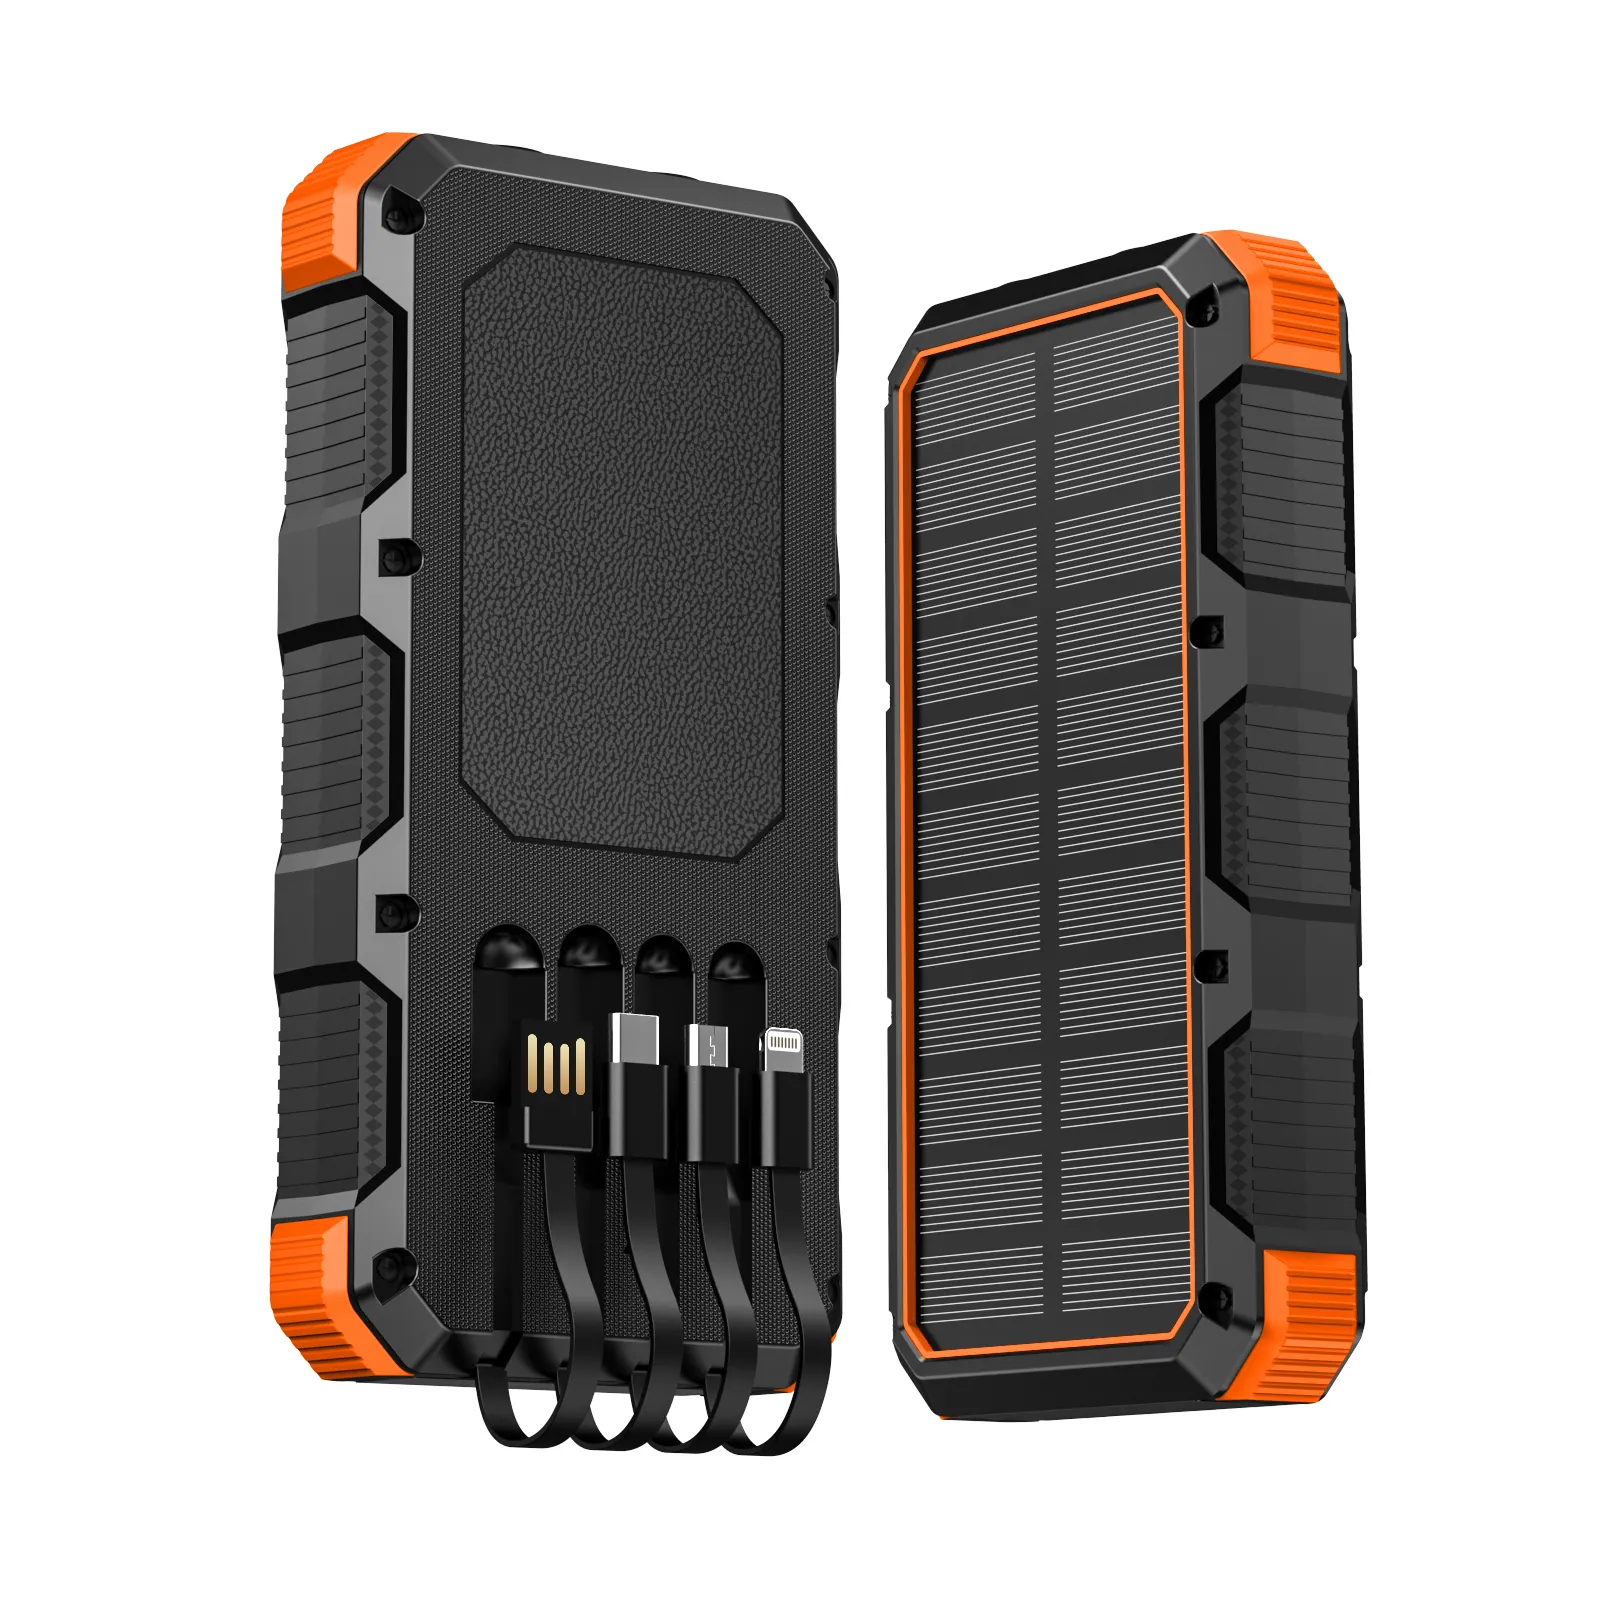 Solar Charger Power Bank 36800mAh with 3USB Port,QC 3.0 Fast Charger Built-in Led Flashlight (with SOS)and 4 Cables2024 Orange